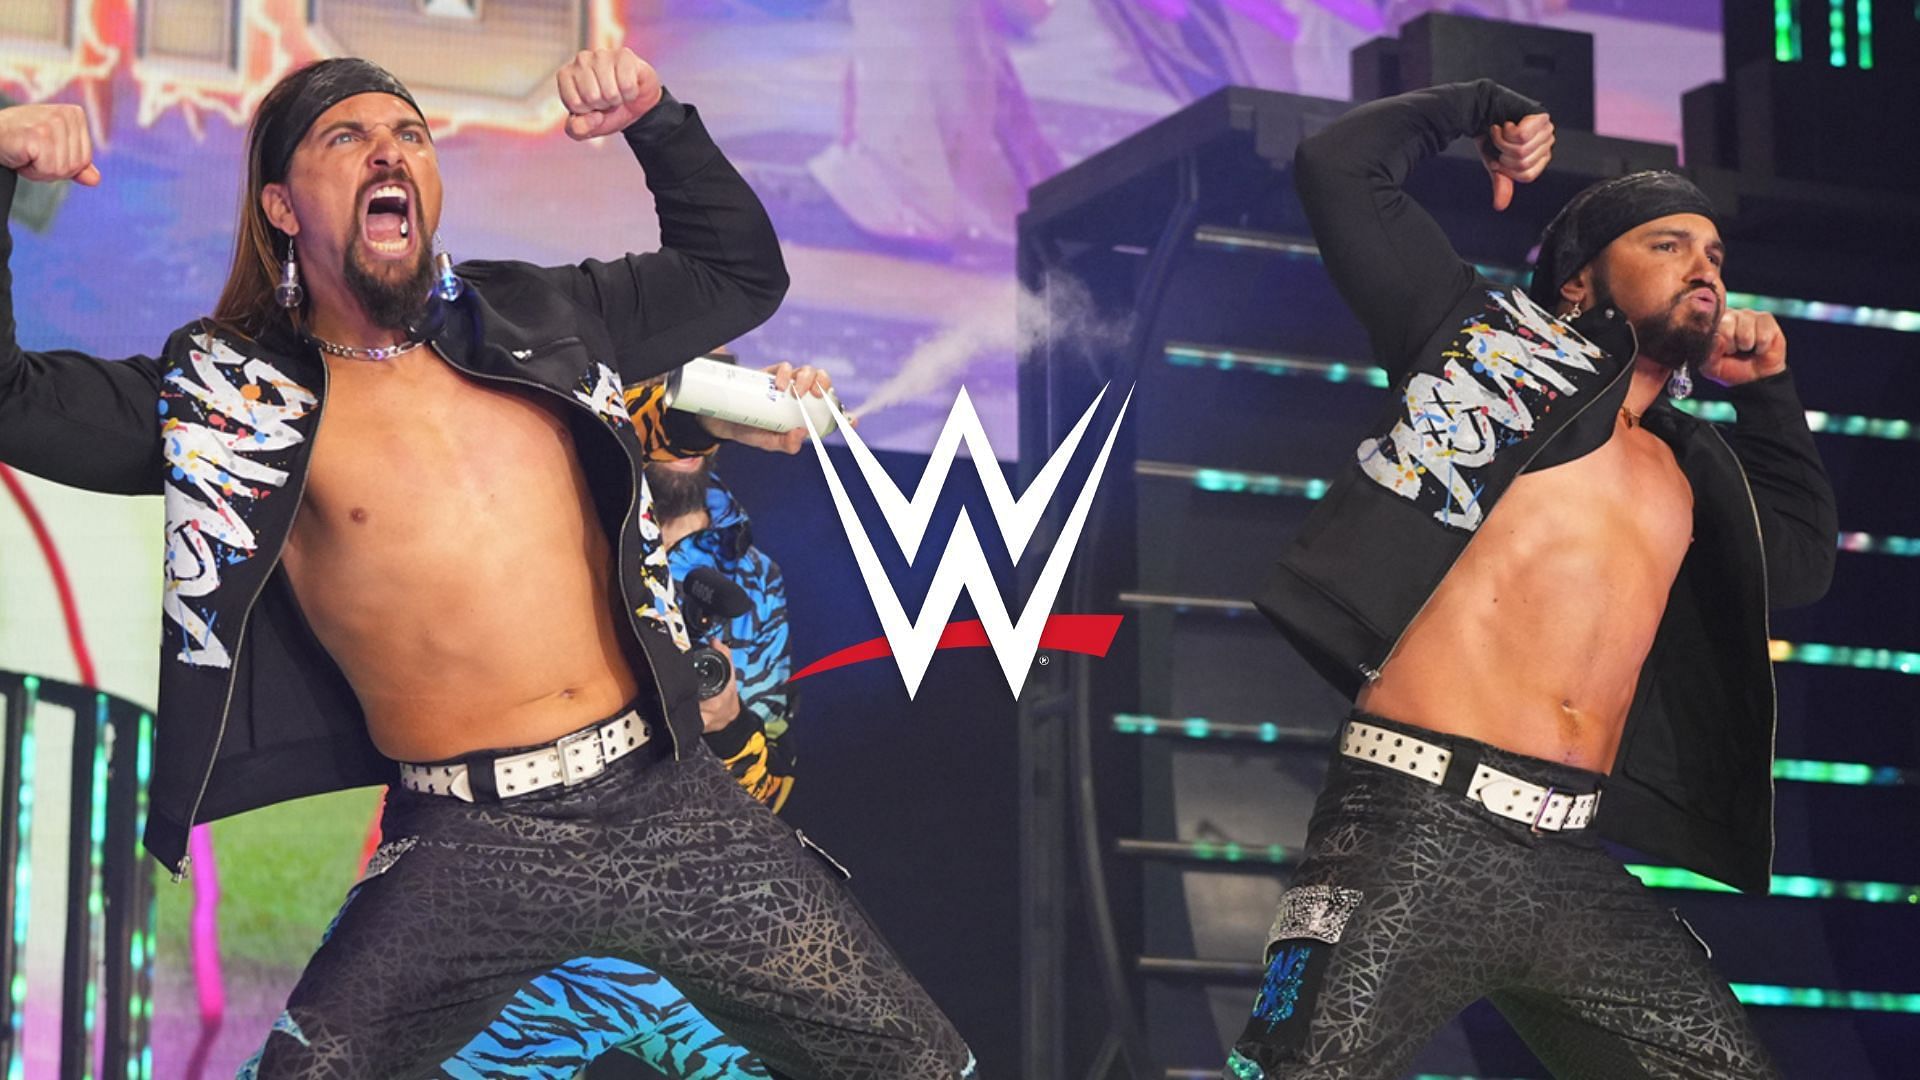 The Young Bucks are the former AEW tag team champions